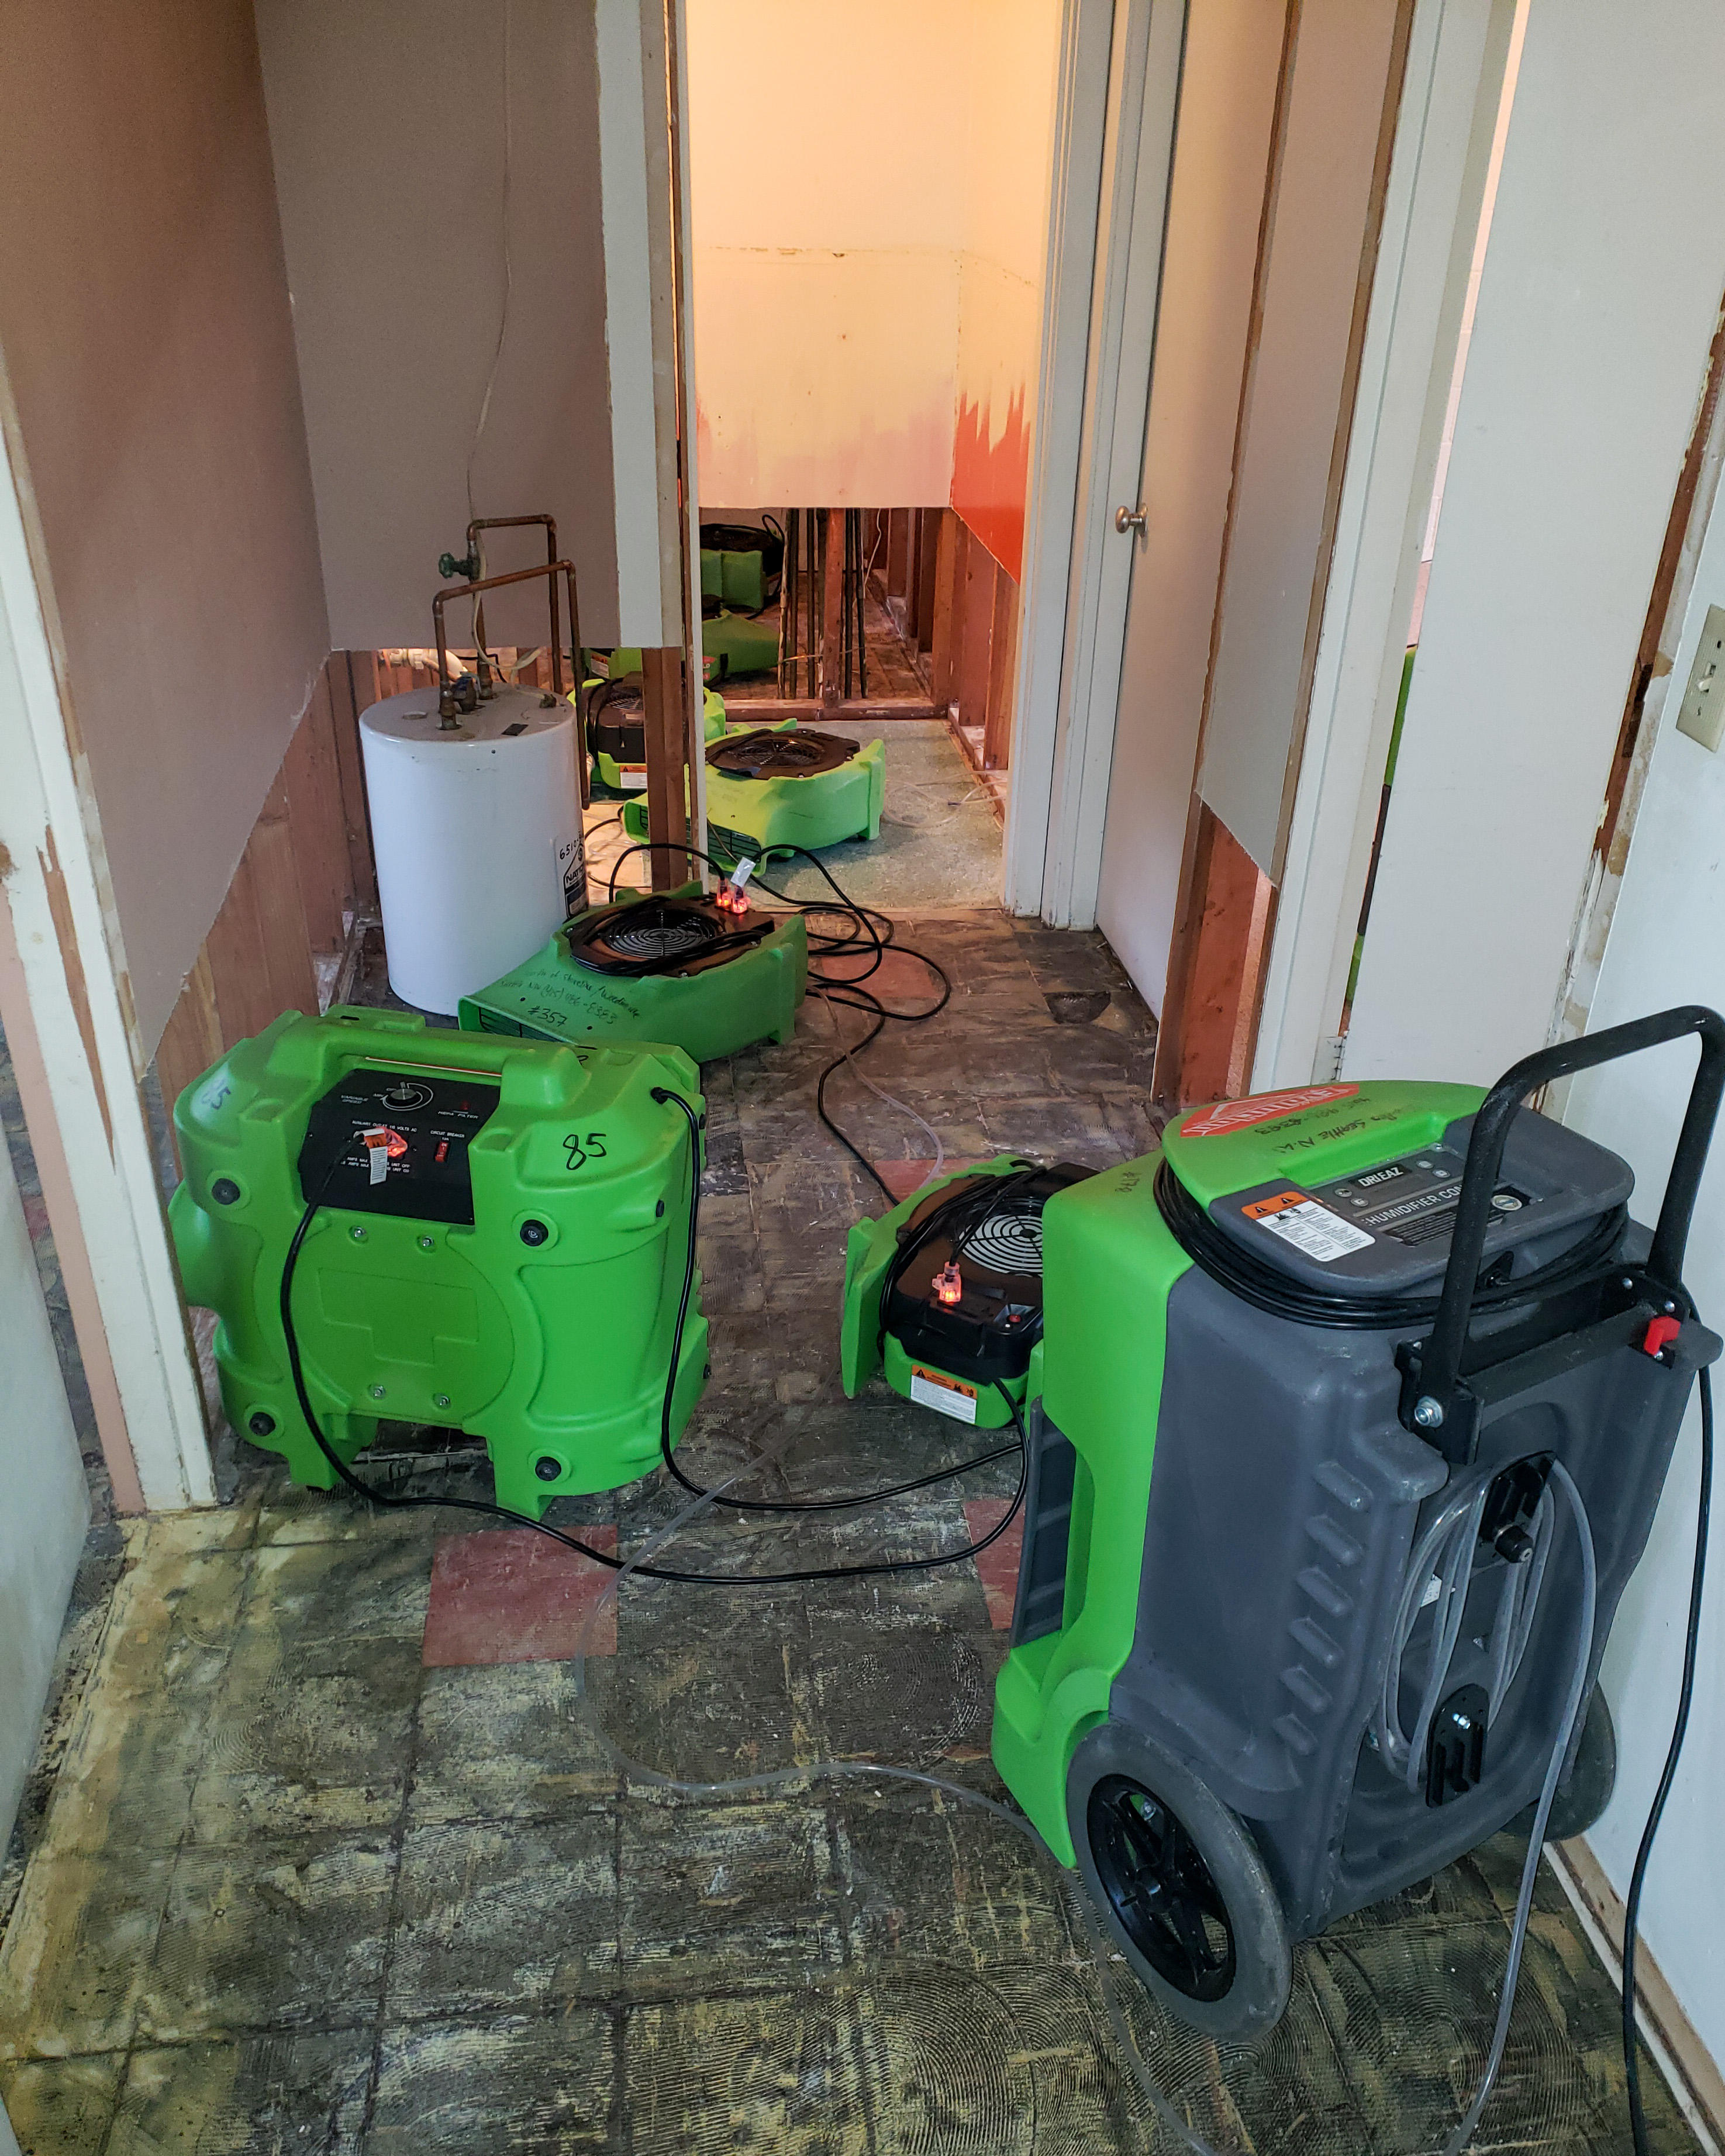 Our team at SERVPRO of Seattle Northwest is on call 24/7 to better help you with your water damage restoration in North Beach, WA. Call the pros at SERVPRO. We Make It "Like it never even happened." 